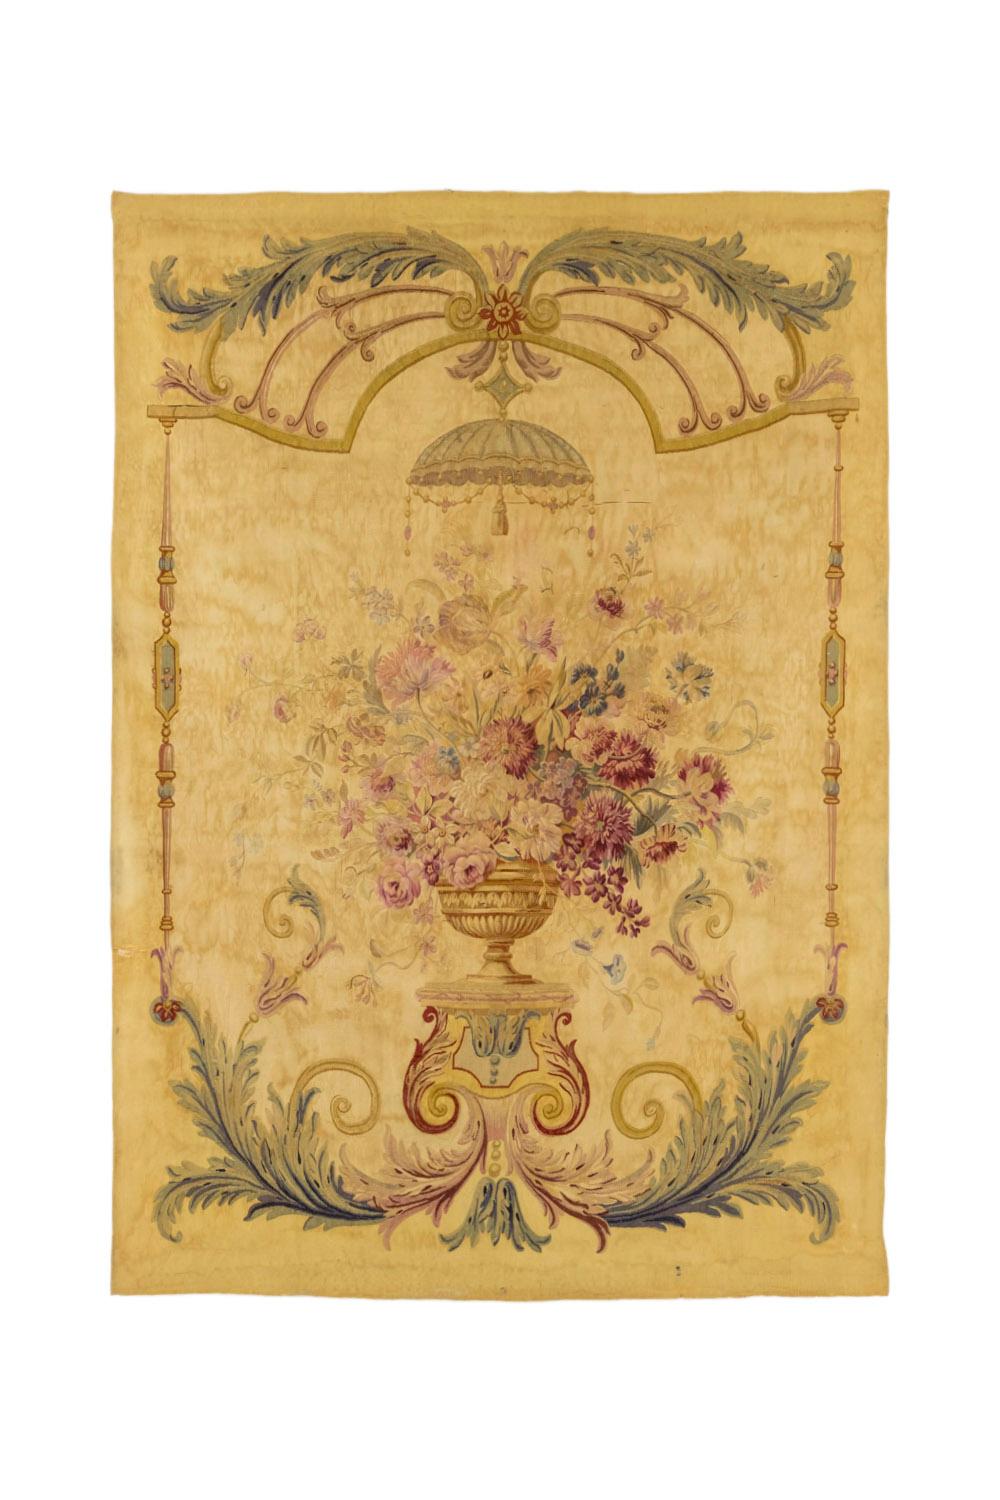 Aubusson tapestry decorated with a piedouche vase adorned with flowers and gadroons. It receives a large flowers bouquet in pink, yellow and blue tones such as peonies, forget-me-not, volubilis, etc. It stands on a piedestal that extends on the